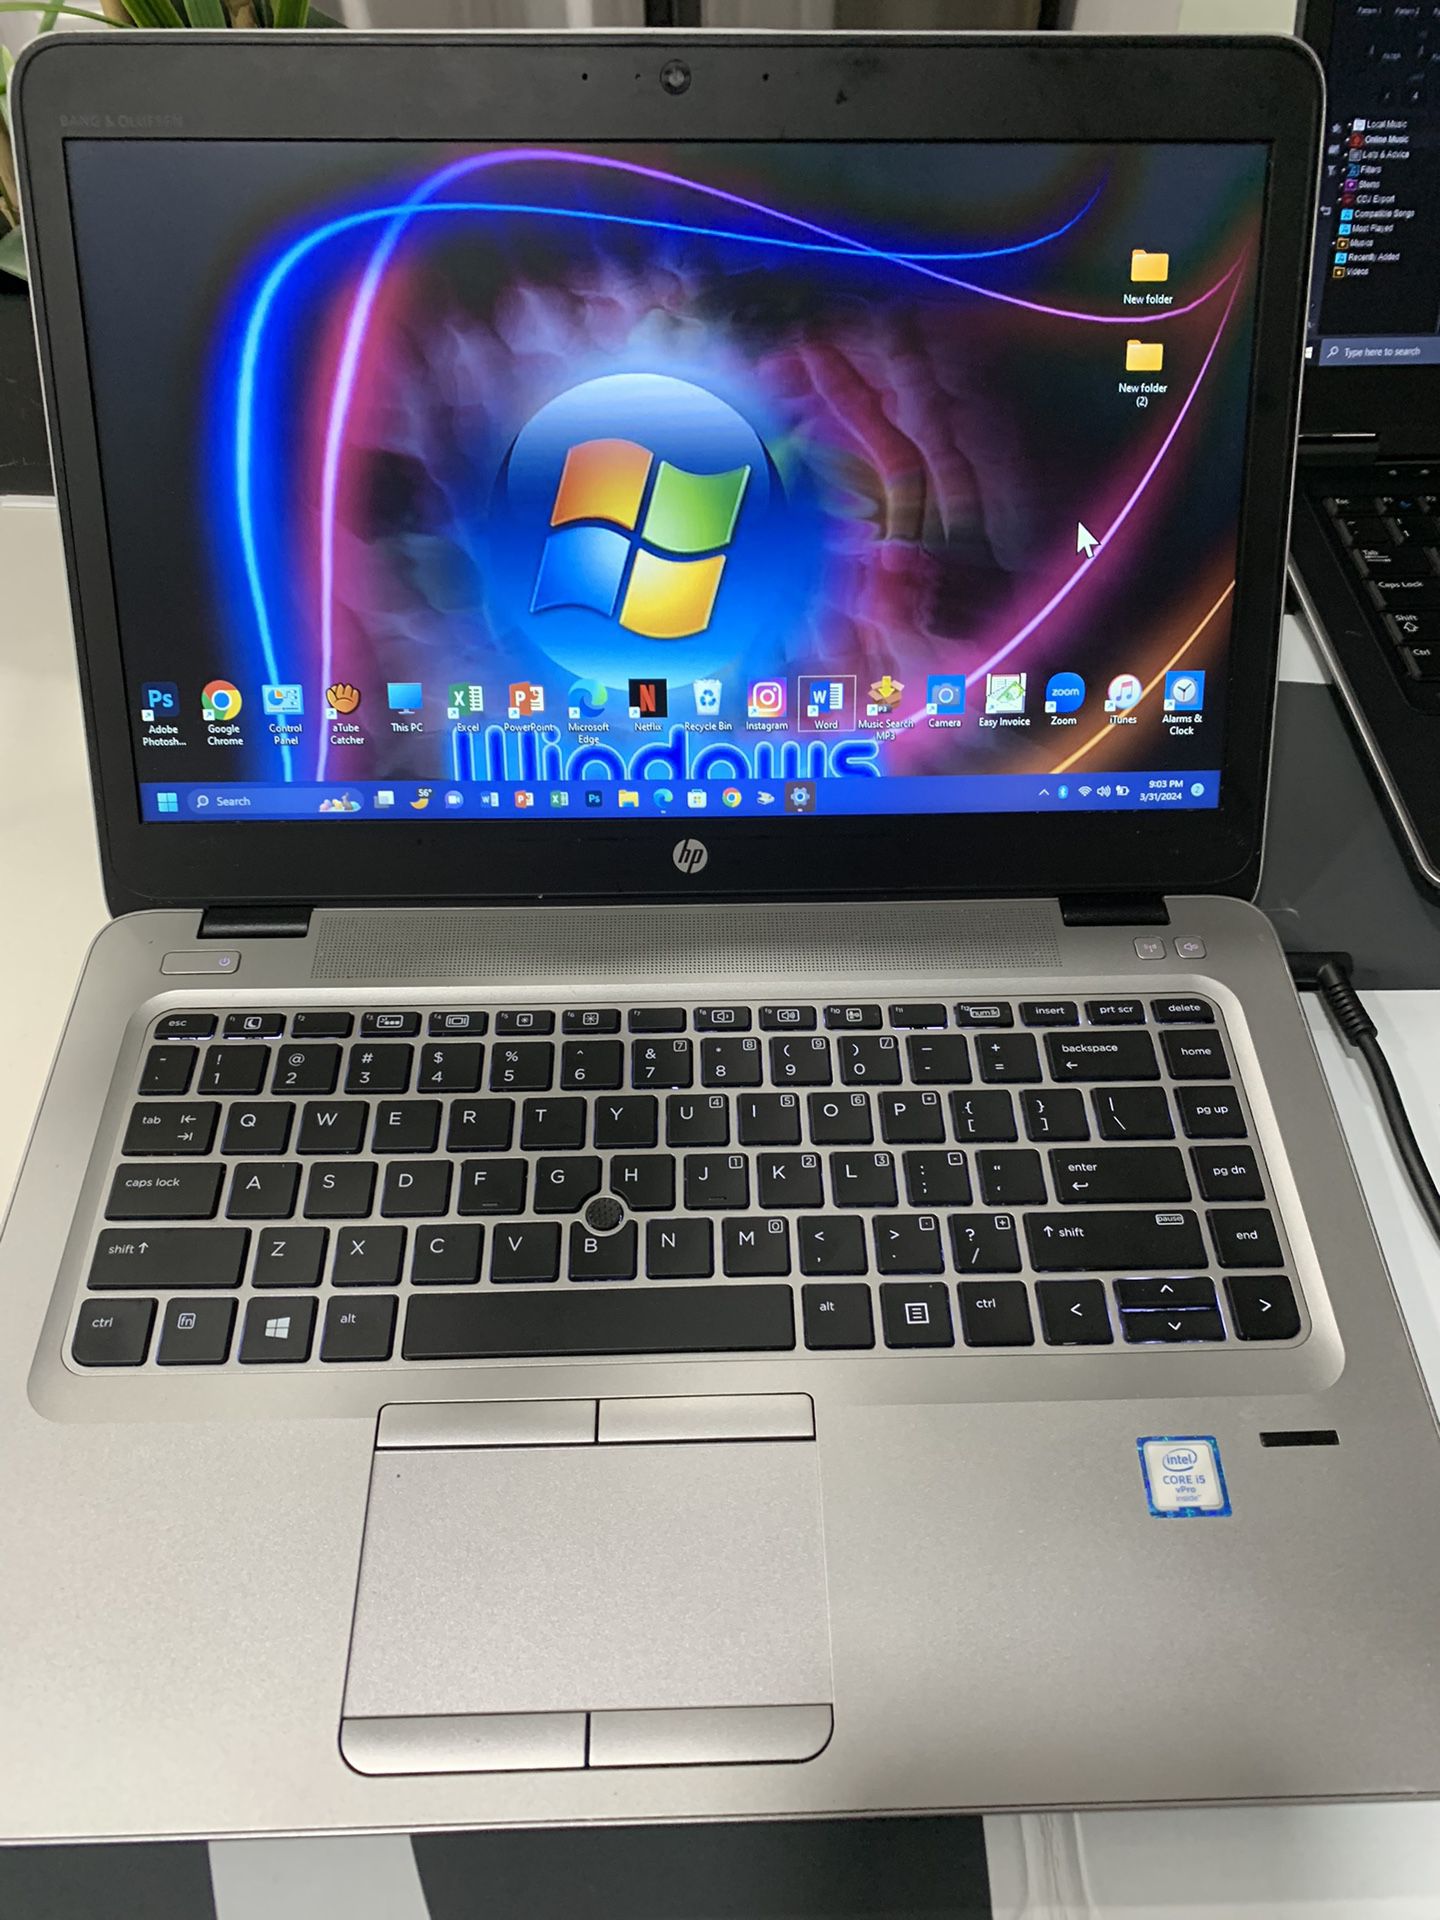 i5…i5…HP ELITEBOOK.  7 GENERATION  PHOTOSHOP and MICROSOFT build On  07/12/2019….128.0 GB SSD  ( Capacity  ) ..8.0 GB RAM . READY FOR CLASSES   